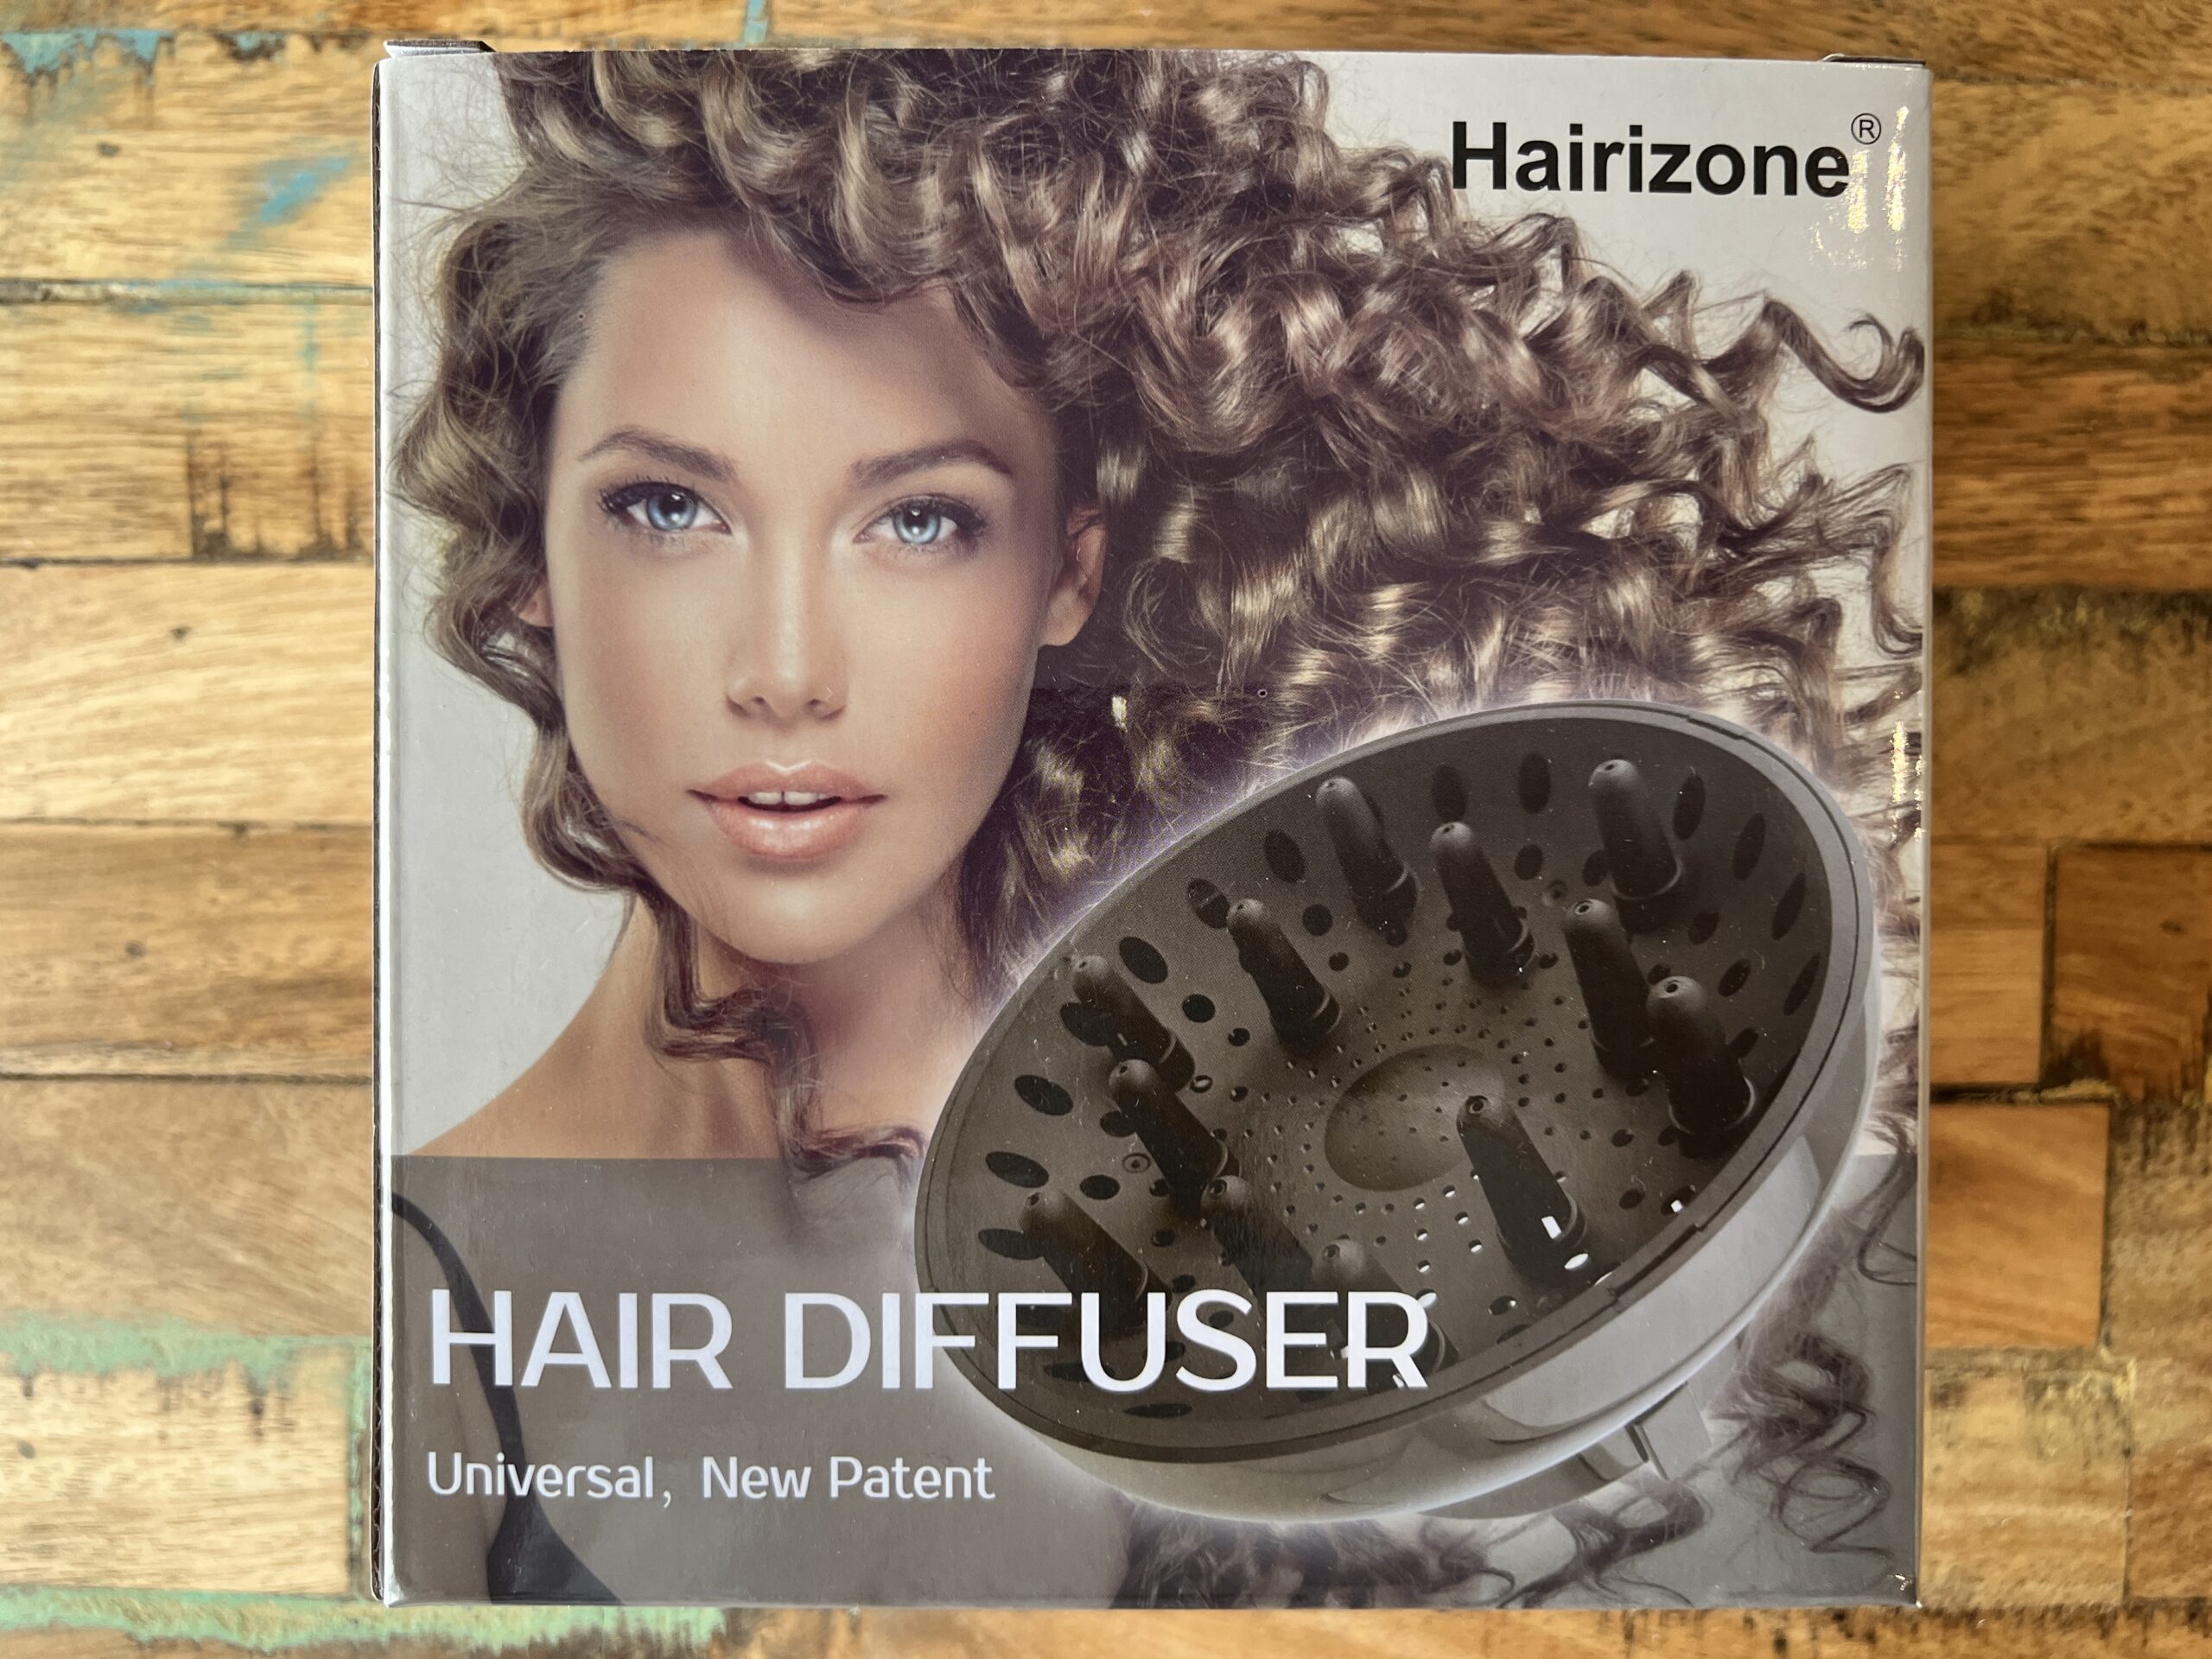 Hairizone universal hair diffuser - the best diffuser for ladies with short hair, thick curly hair, dry hair, and thinner hair strands.